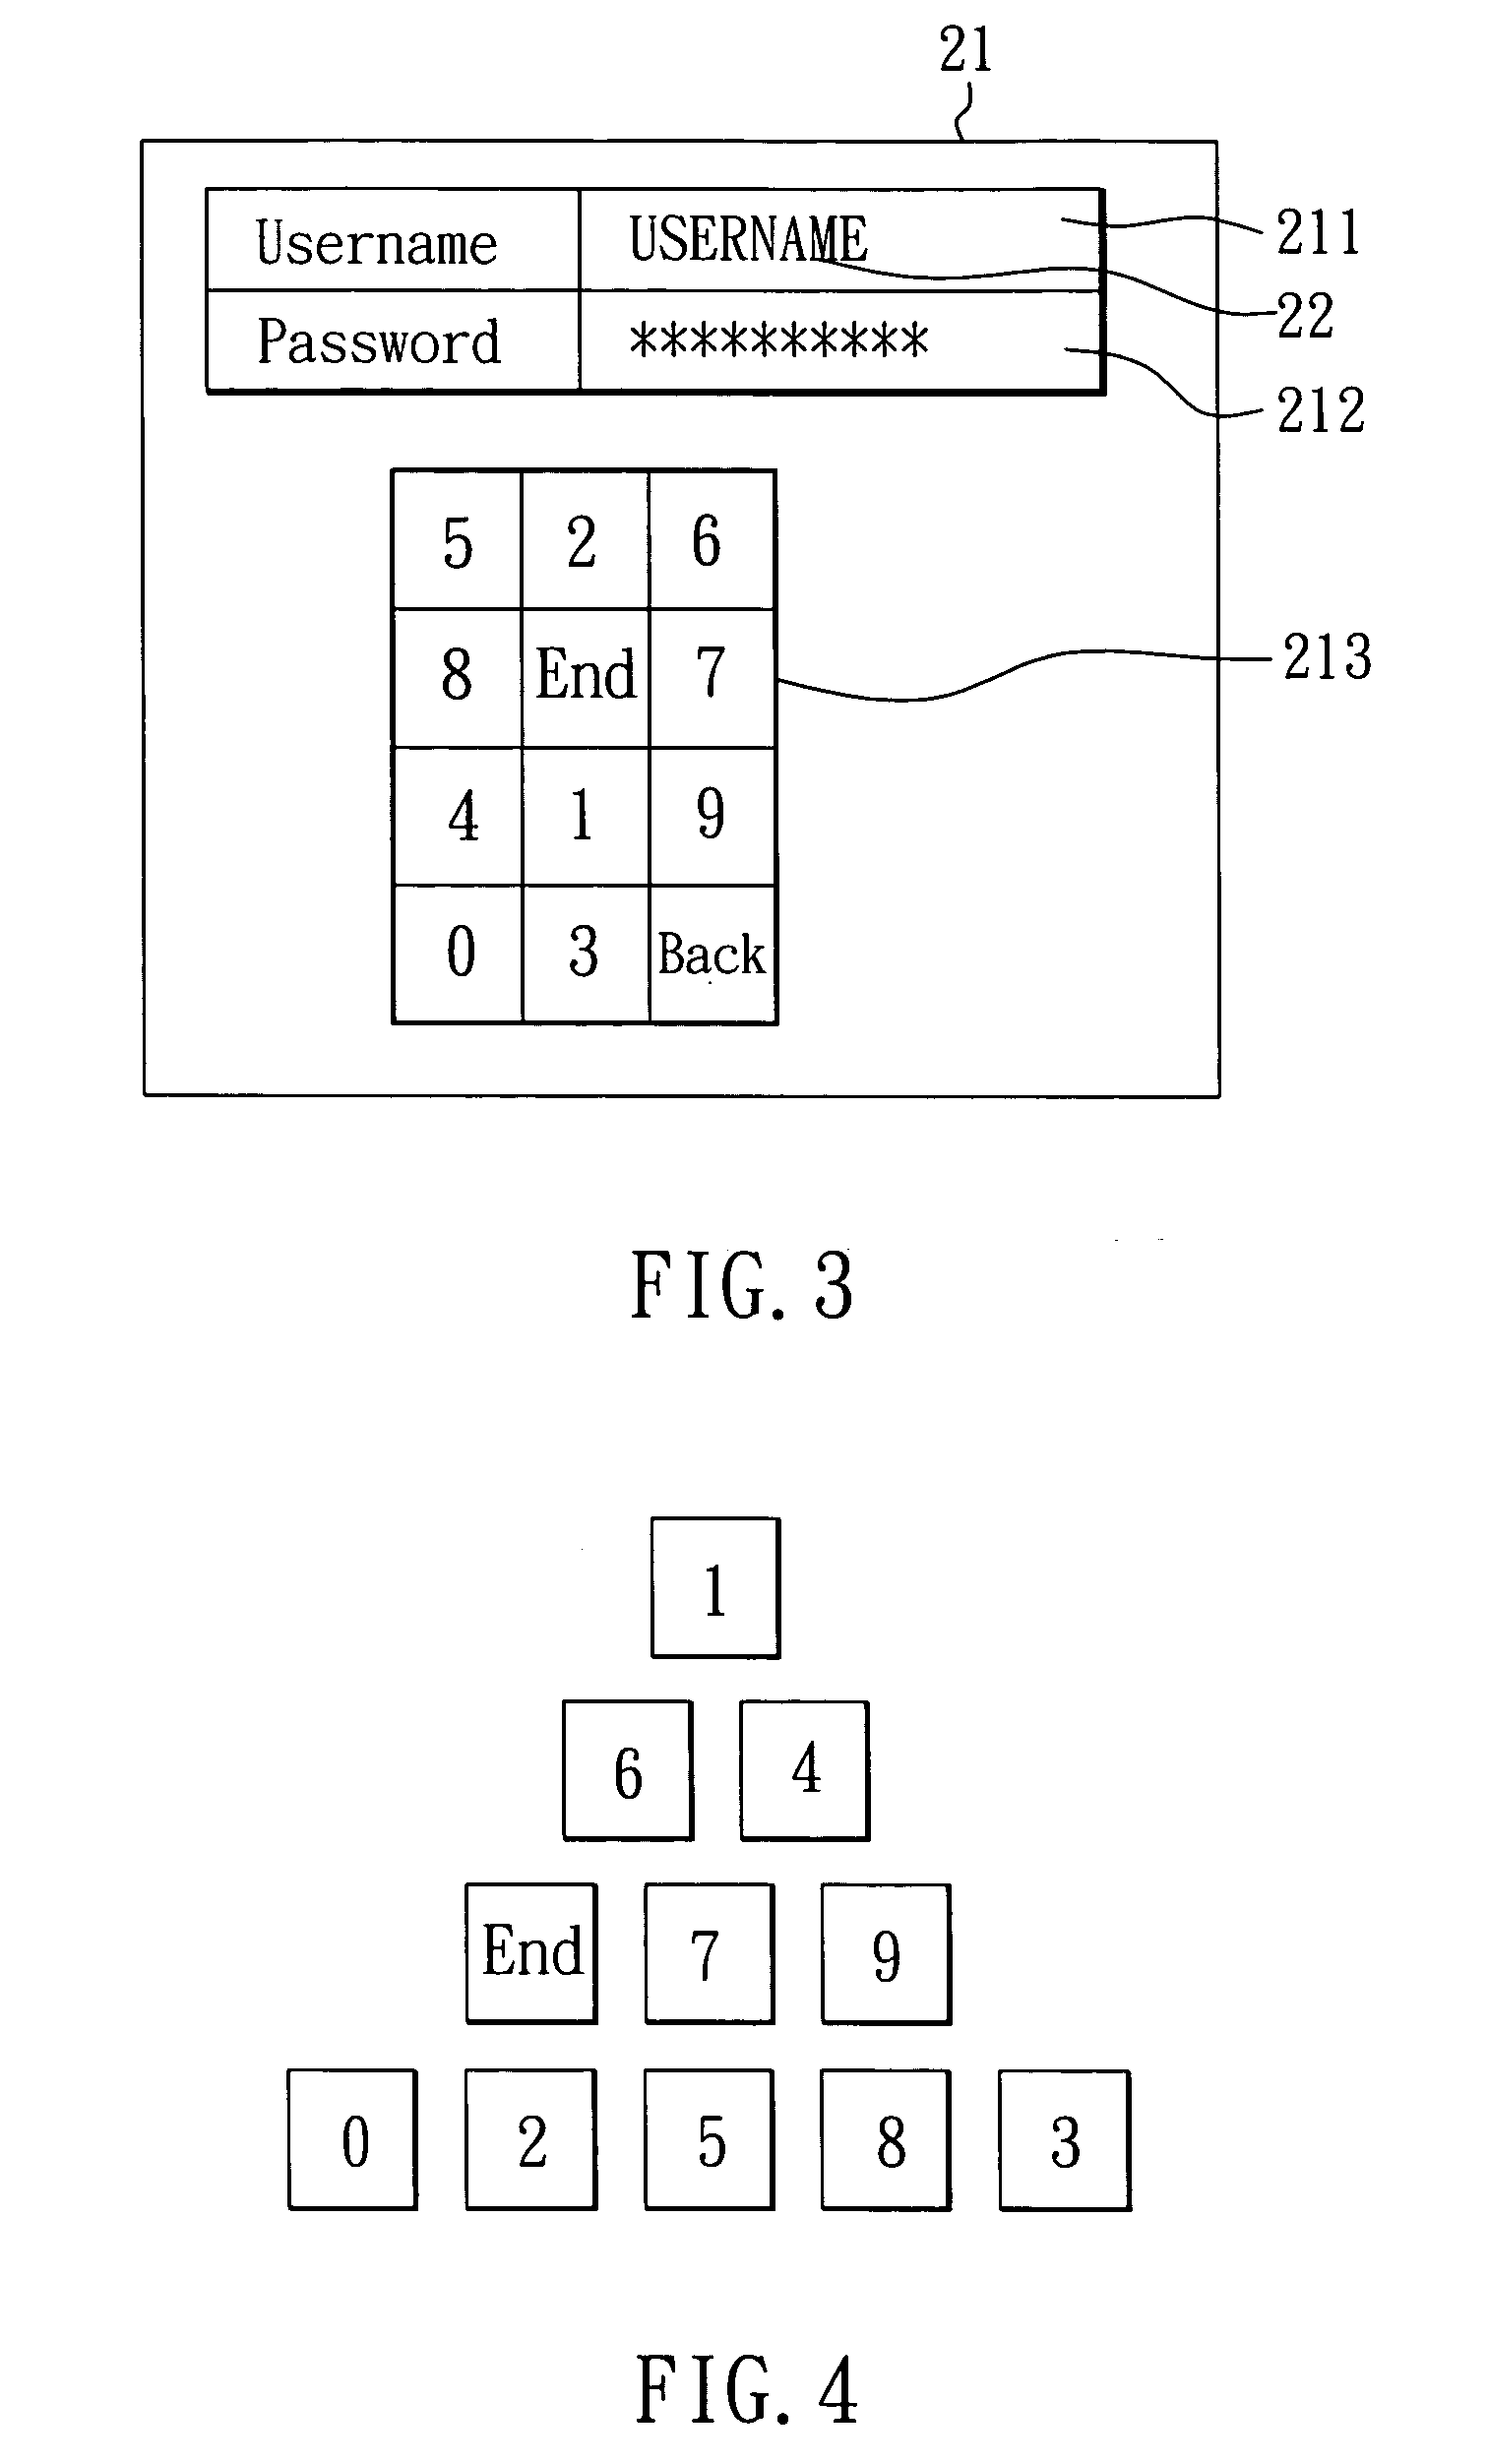 Logon system for an electronic device